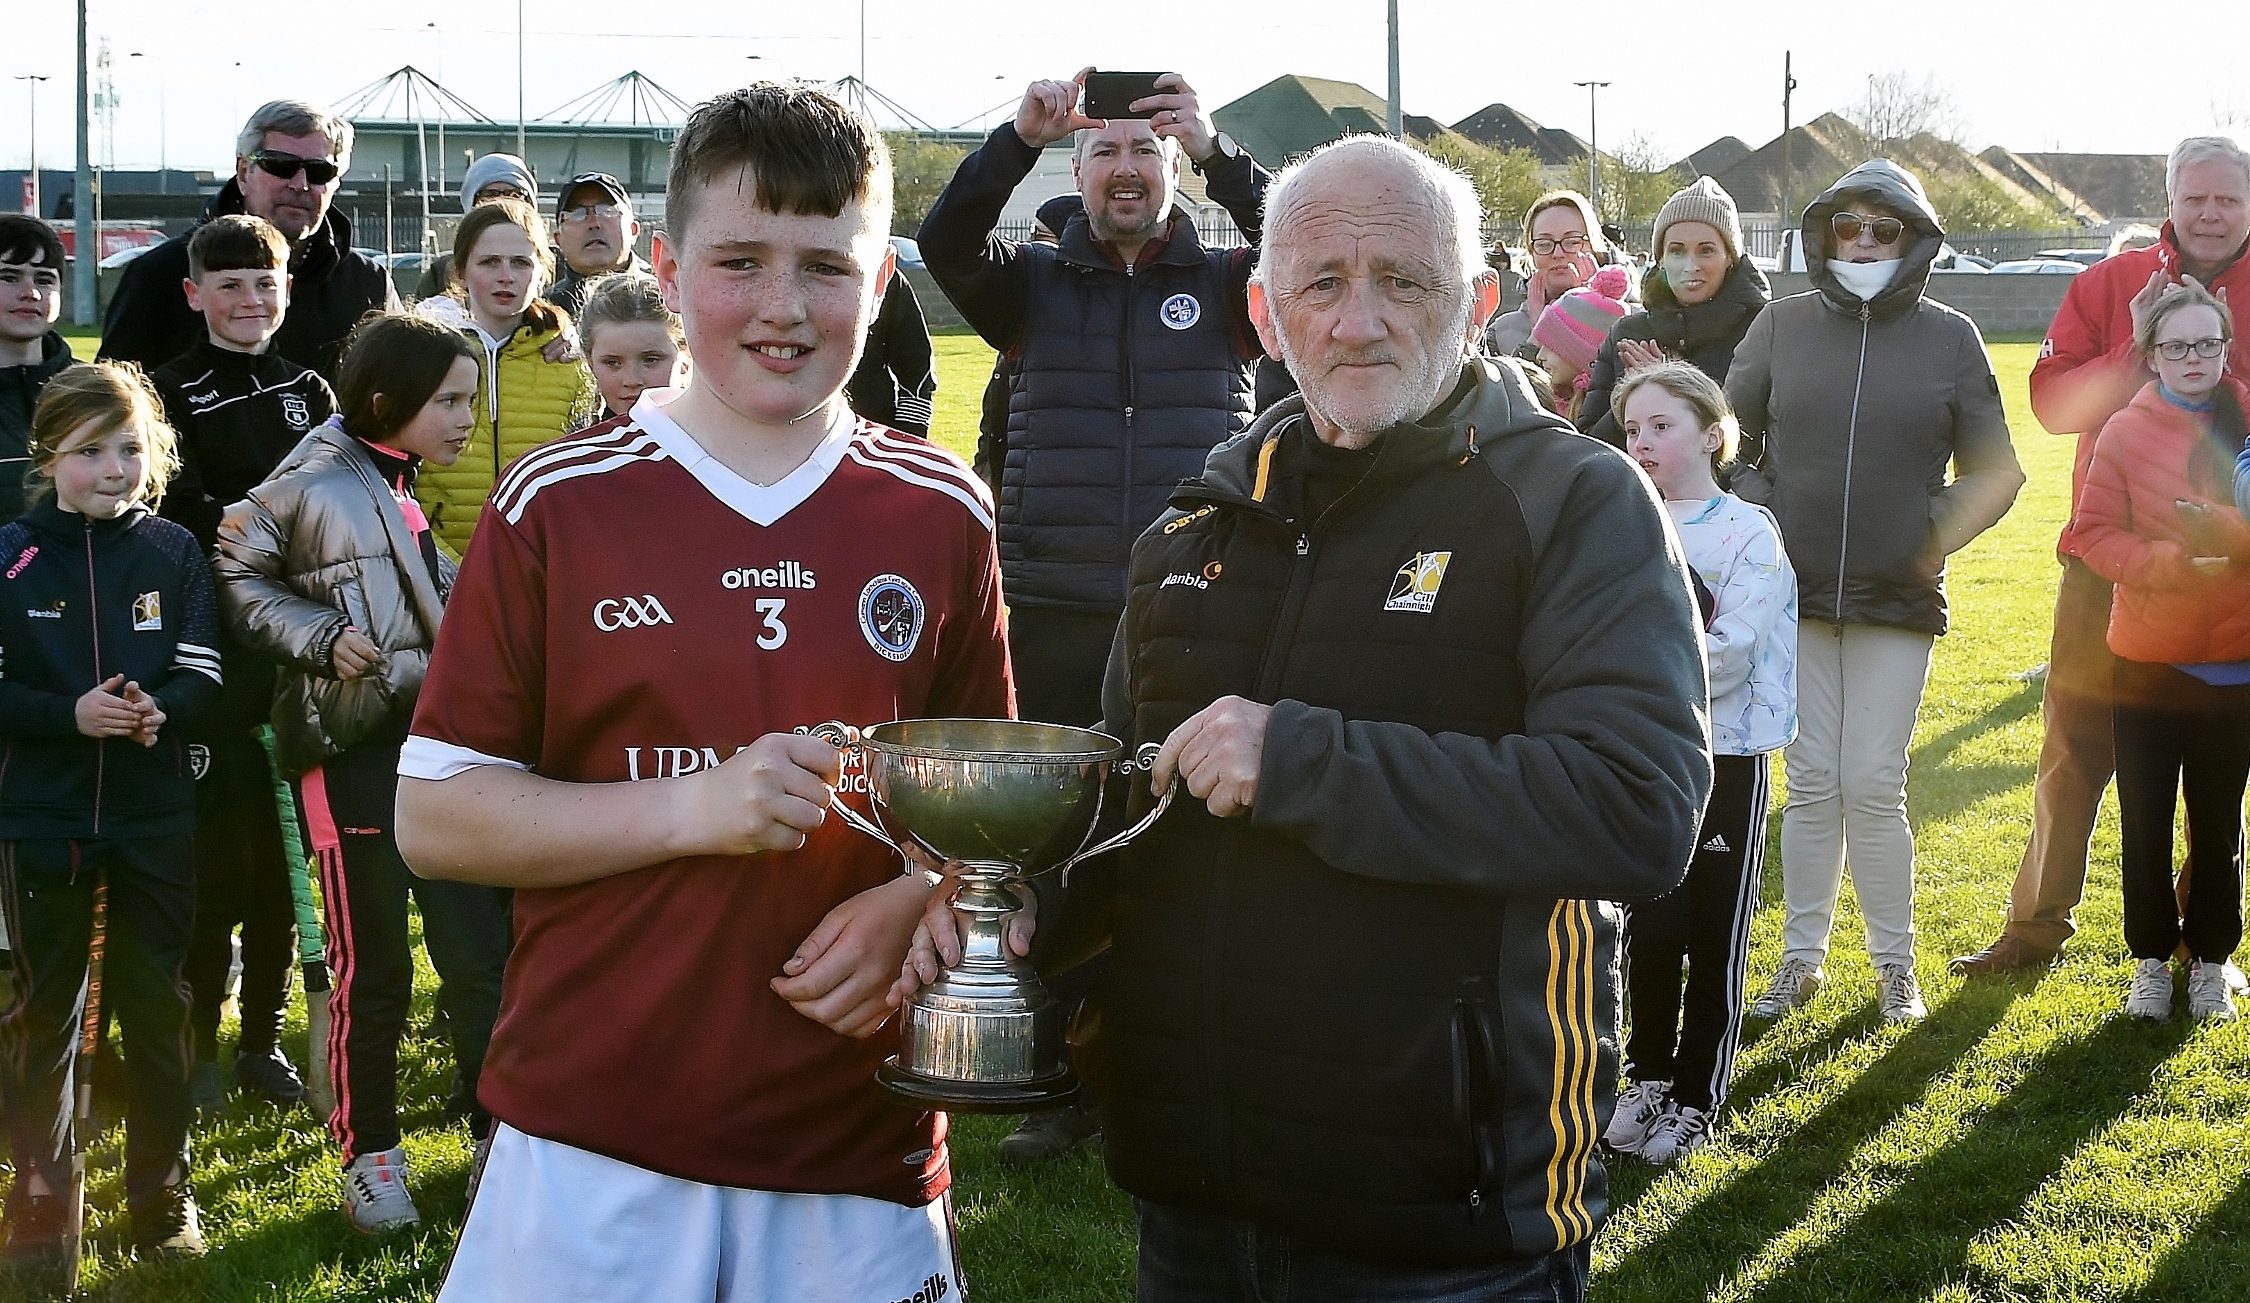 BNG Hurling Leagues up and running while Football Final take centre stage